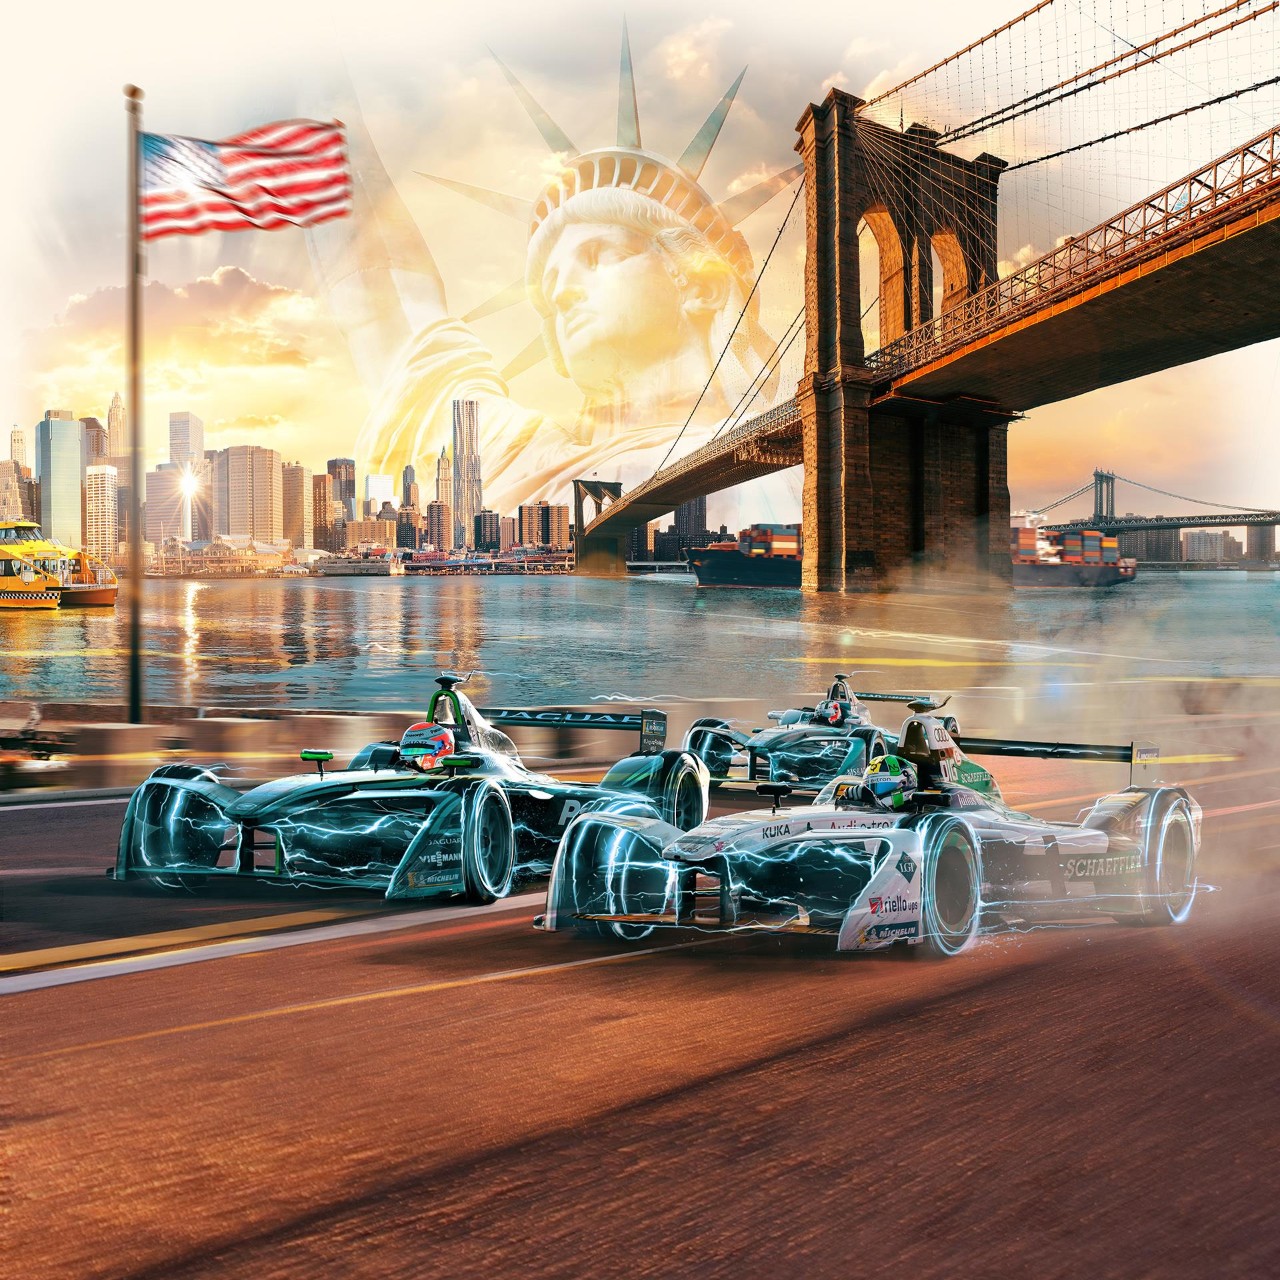 Allianz concludes Formula E race season in New York City with celebration of art and technology